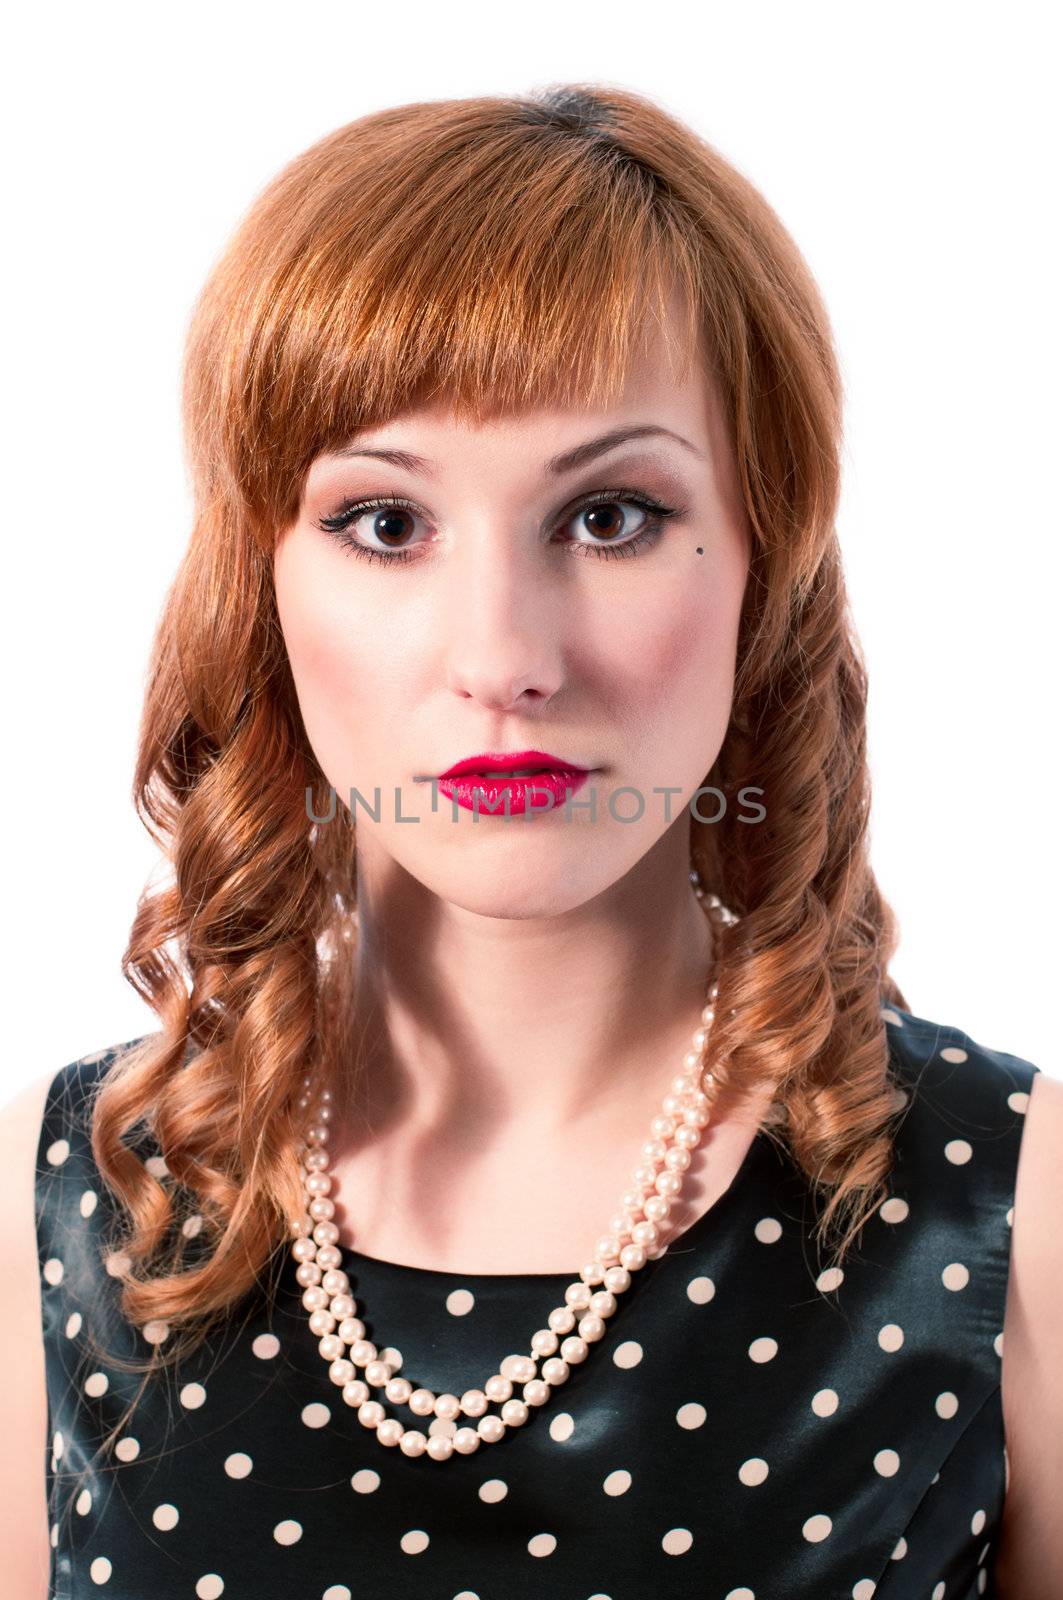 Retro girl with pearl necklace smiling